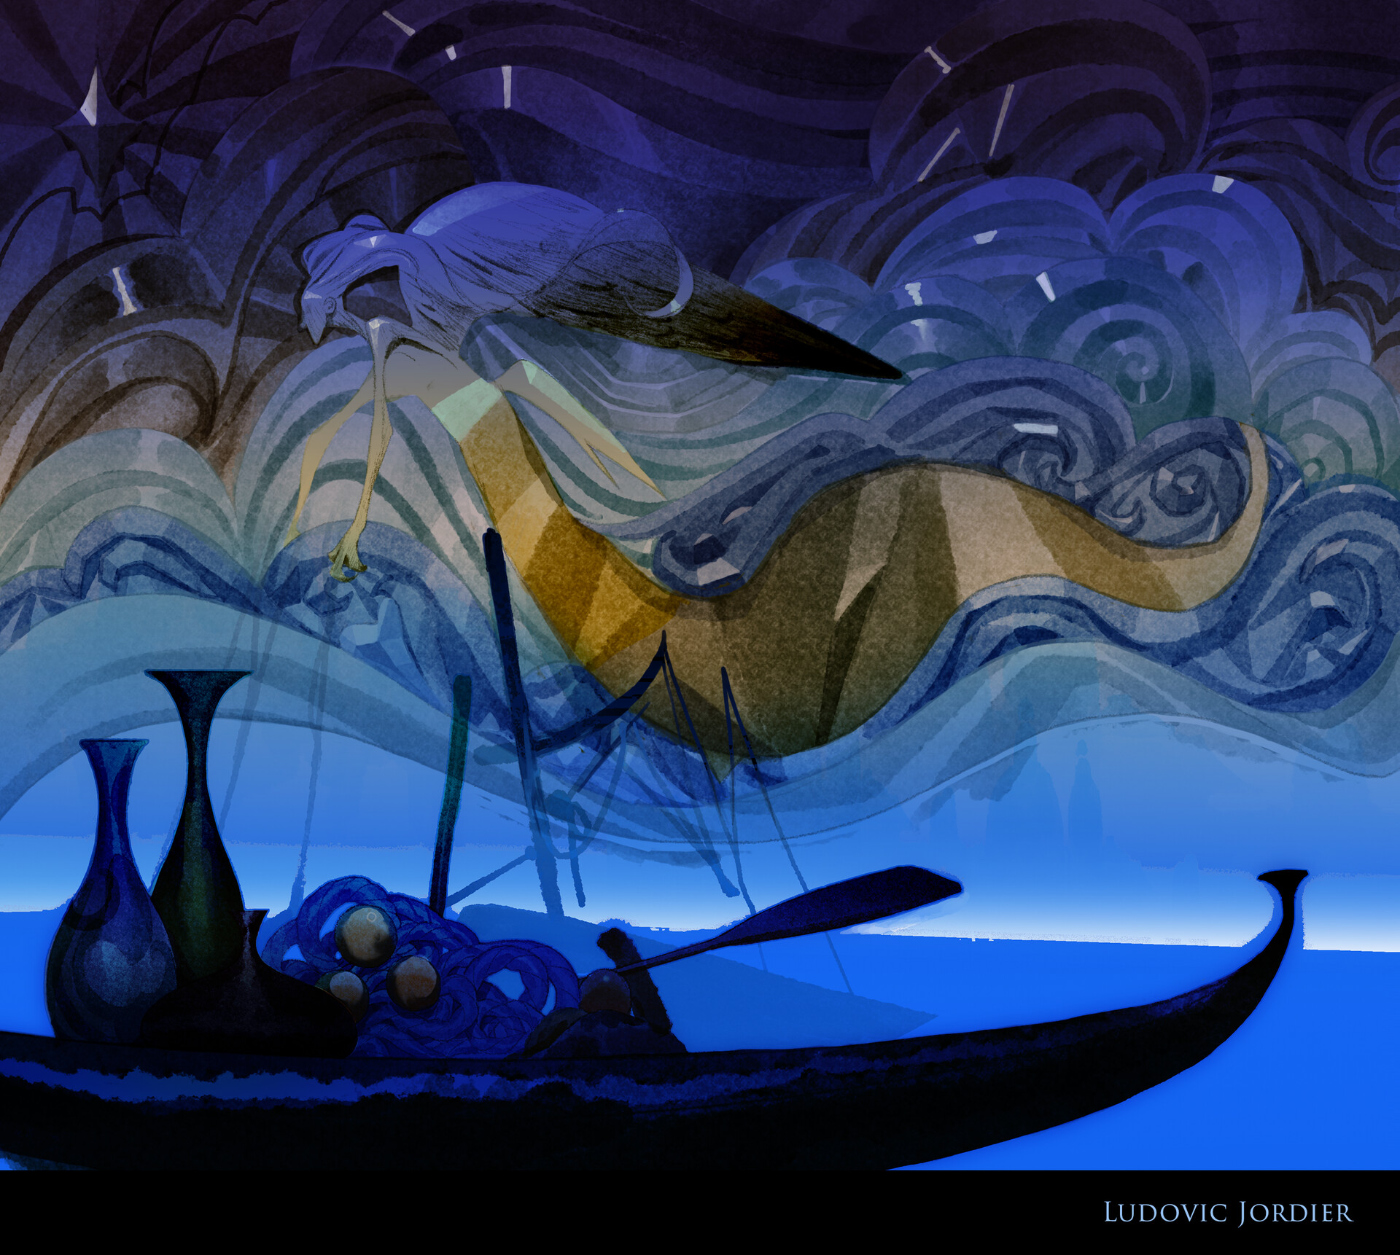 An art piece in an impressionistic style depicting a person in a canoe under a mystic, starry sky.